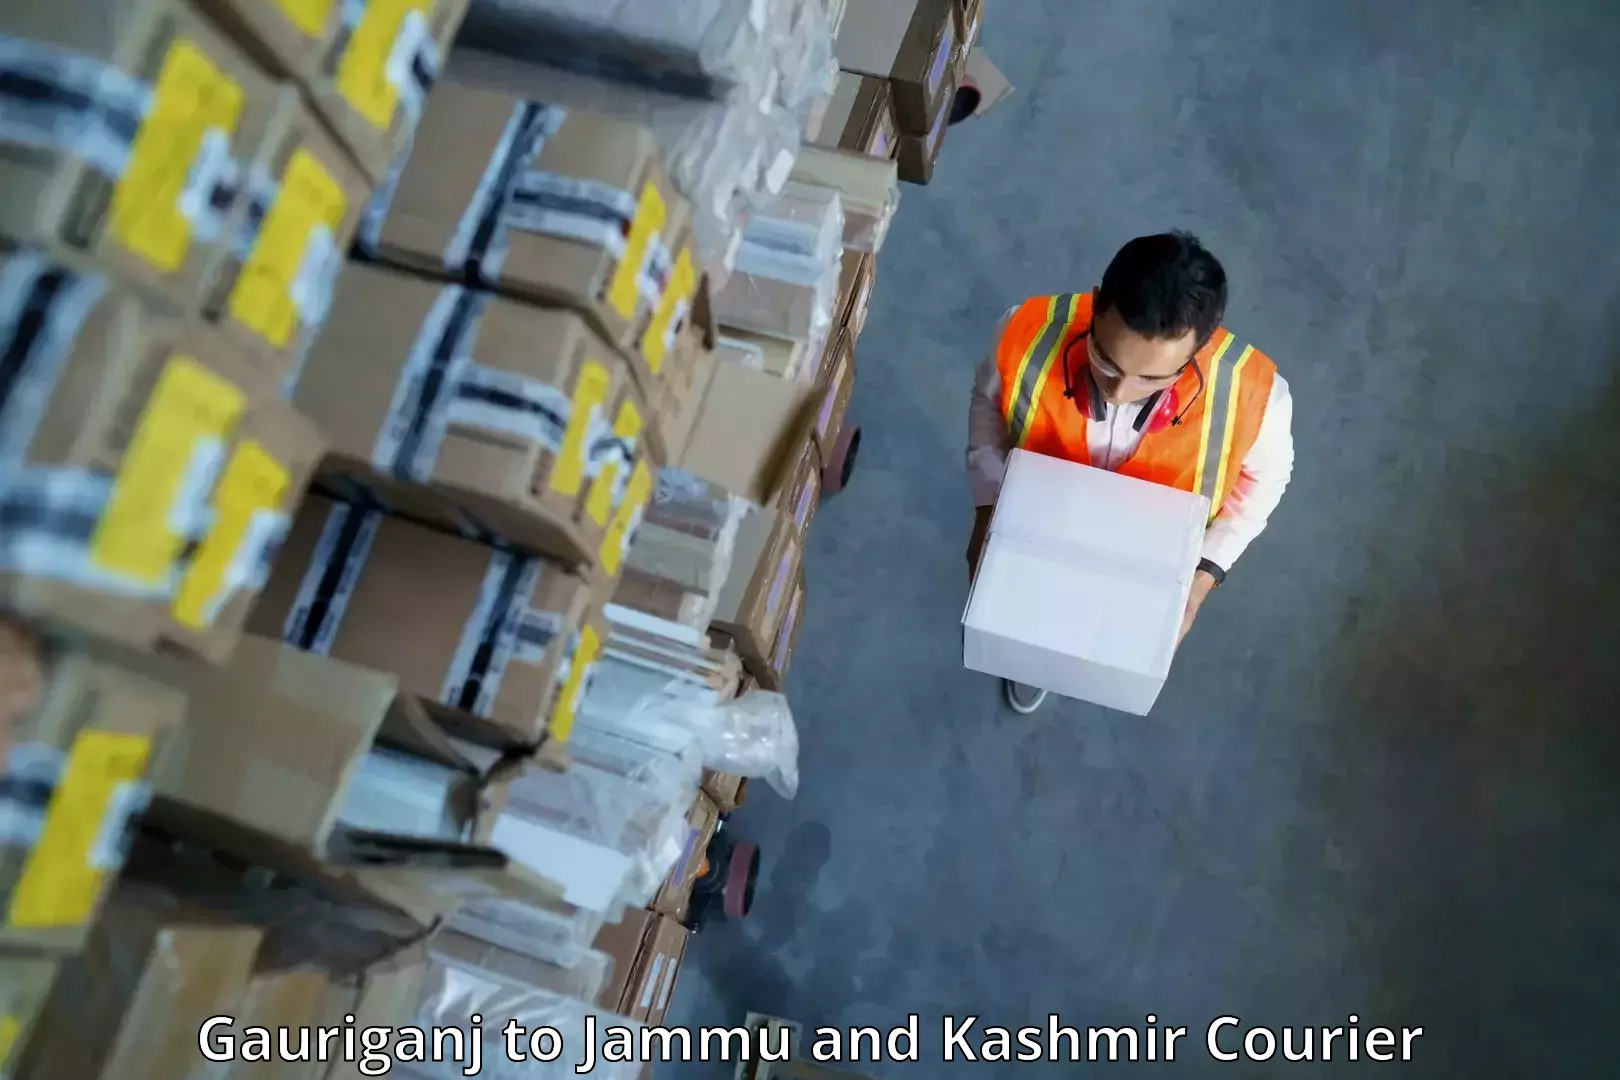 Easy access courier services Gauriganj to Jammu and Kashmir